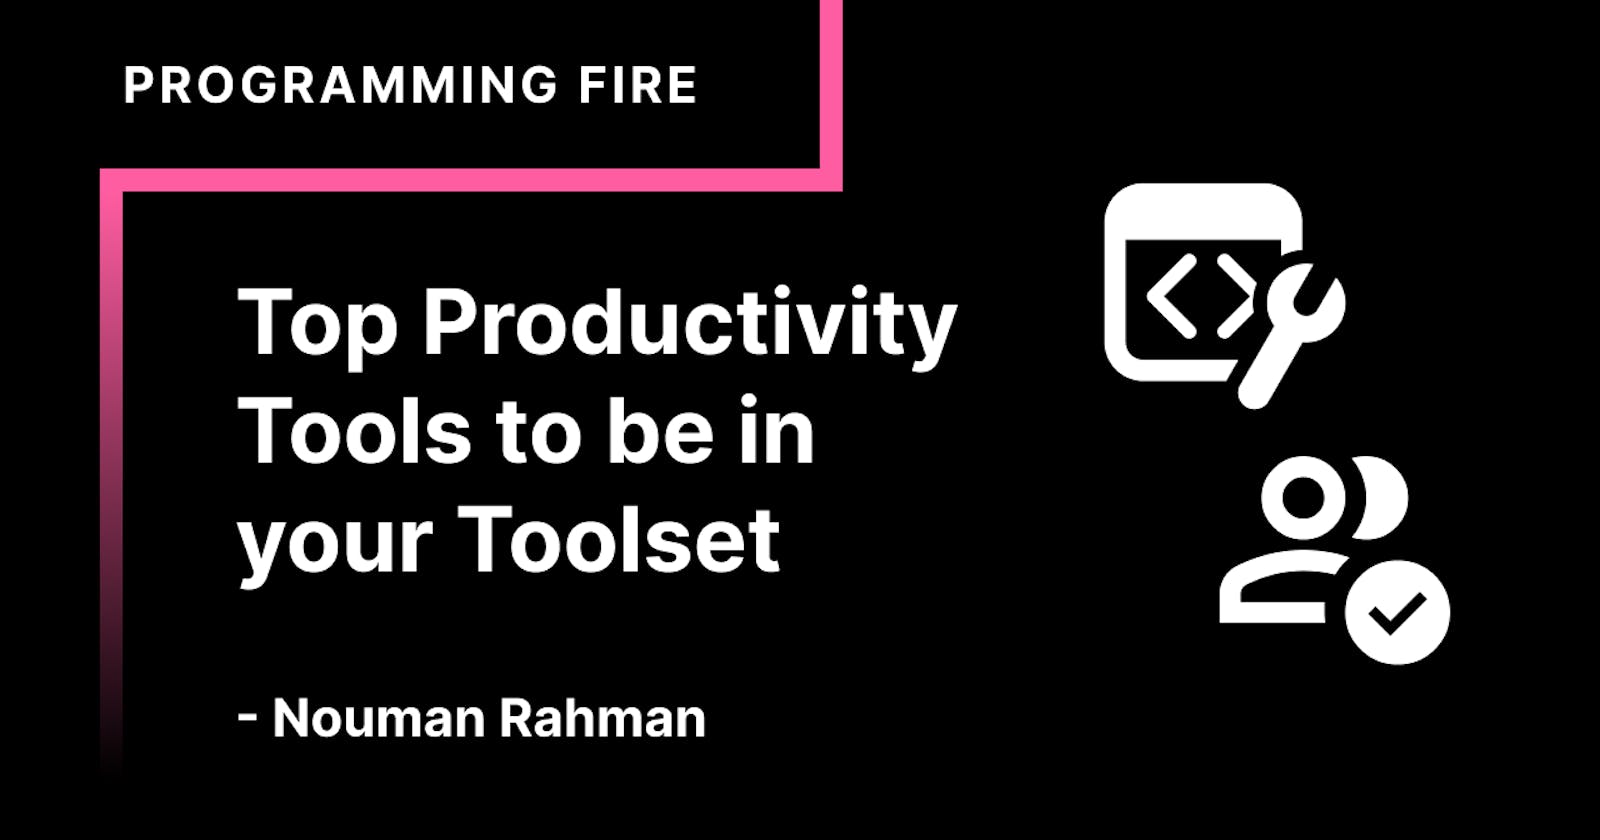 Top Productivity Tools to be in your Toolset